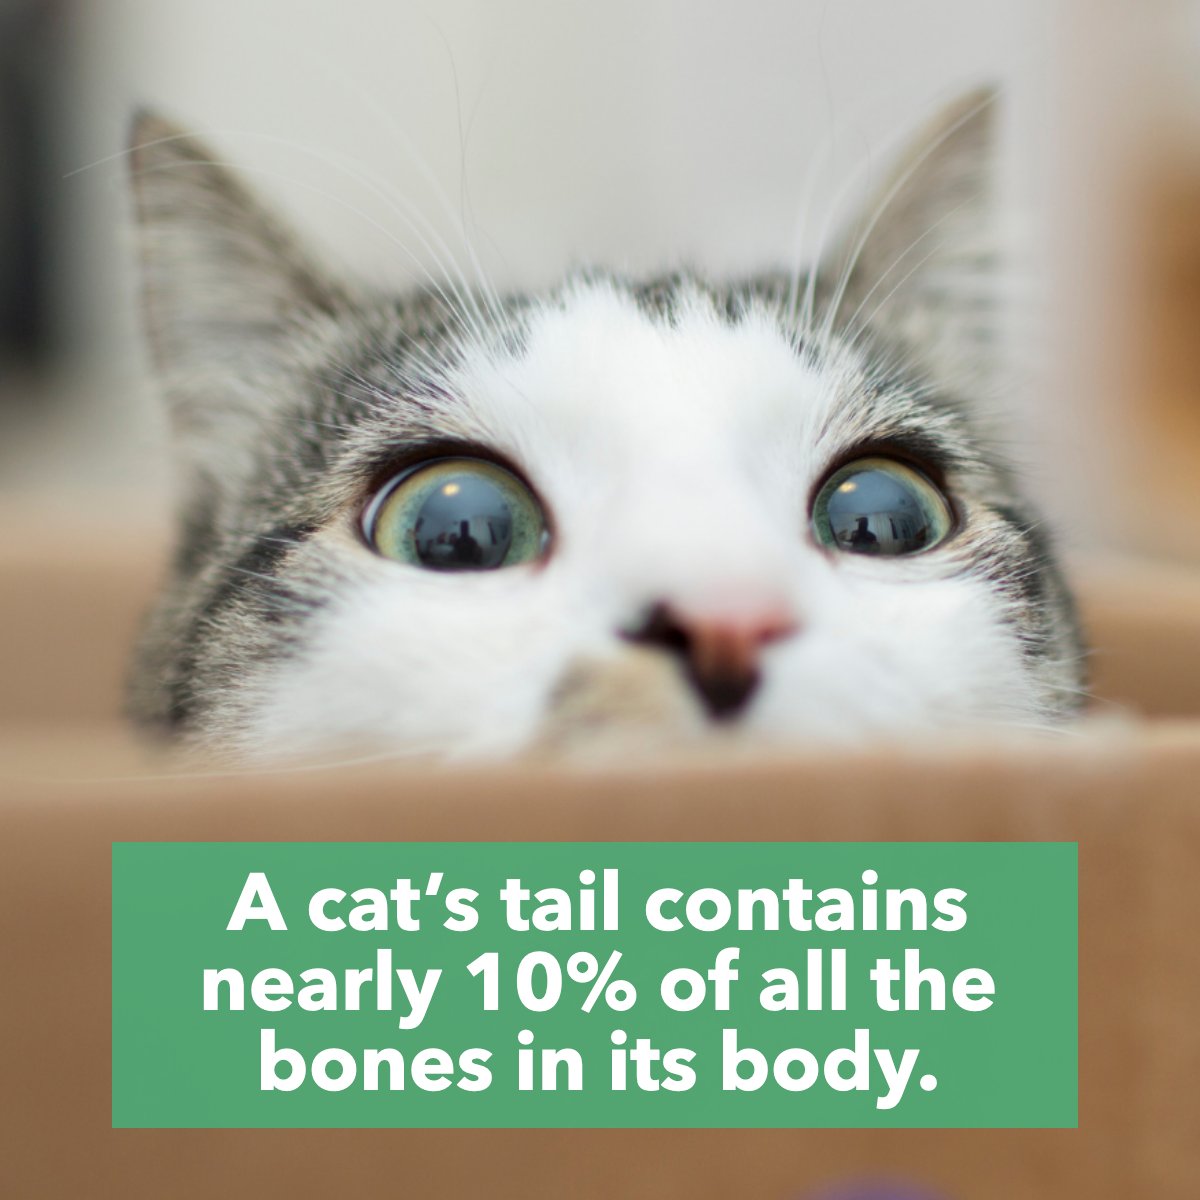 Did you know? 

A cat's tail 🐈 contains nearly 10% of all the bones in its body. 

Do you have a cat? Let us know in the comments! 👇

#cat    #cats    #pet    #pets    #petfacts    #funfact    #petowner